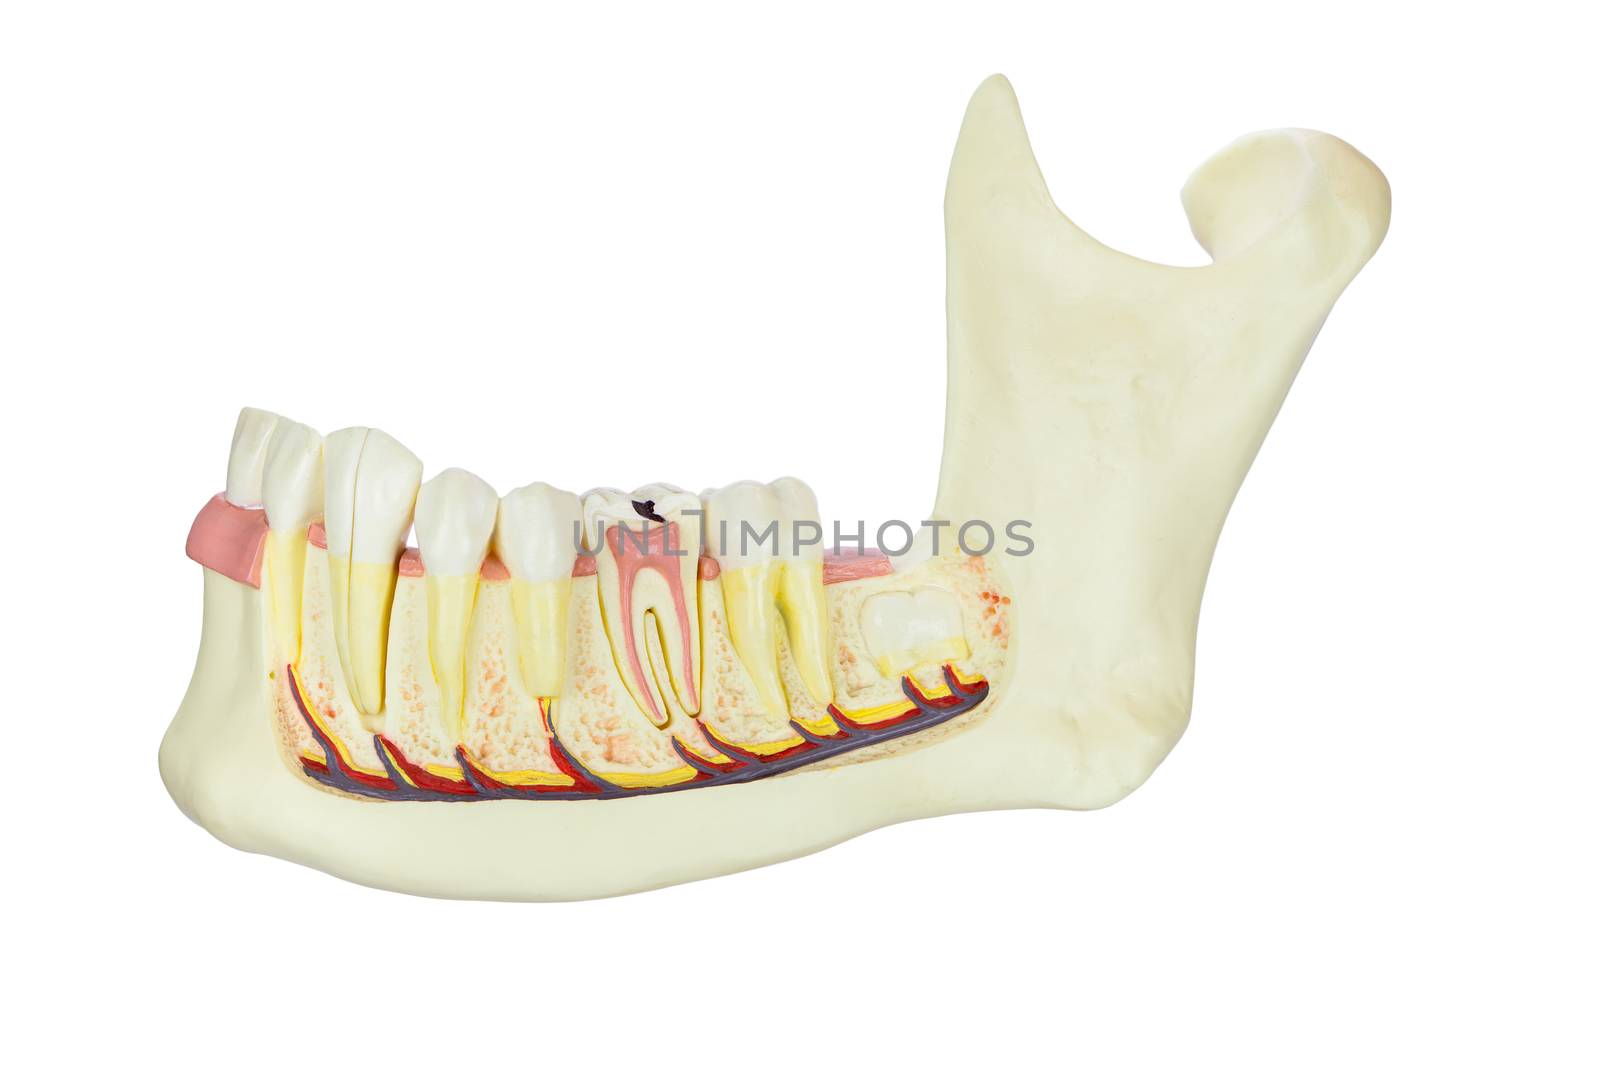 Model human jawbone with teeth isolated on white background  by BenSchonewille